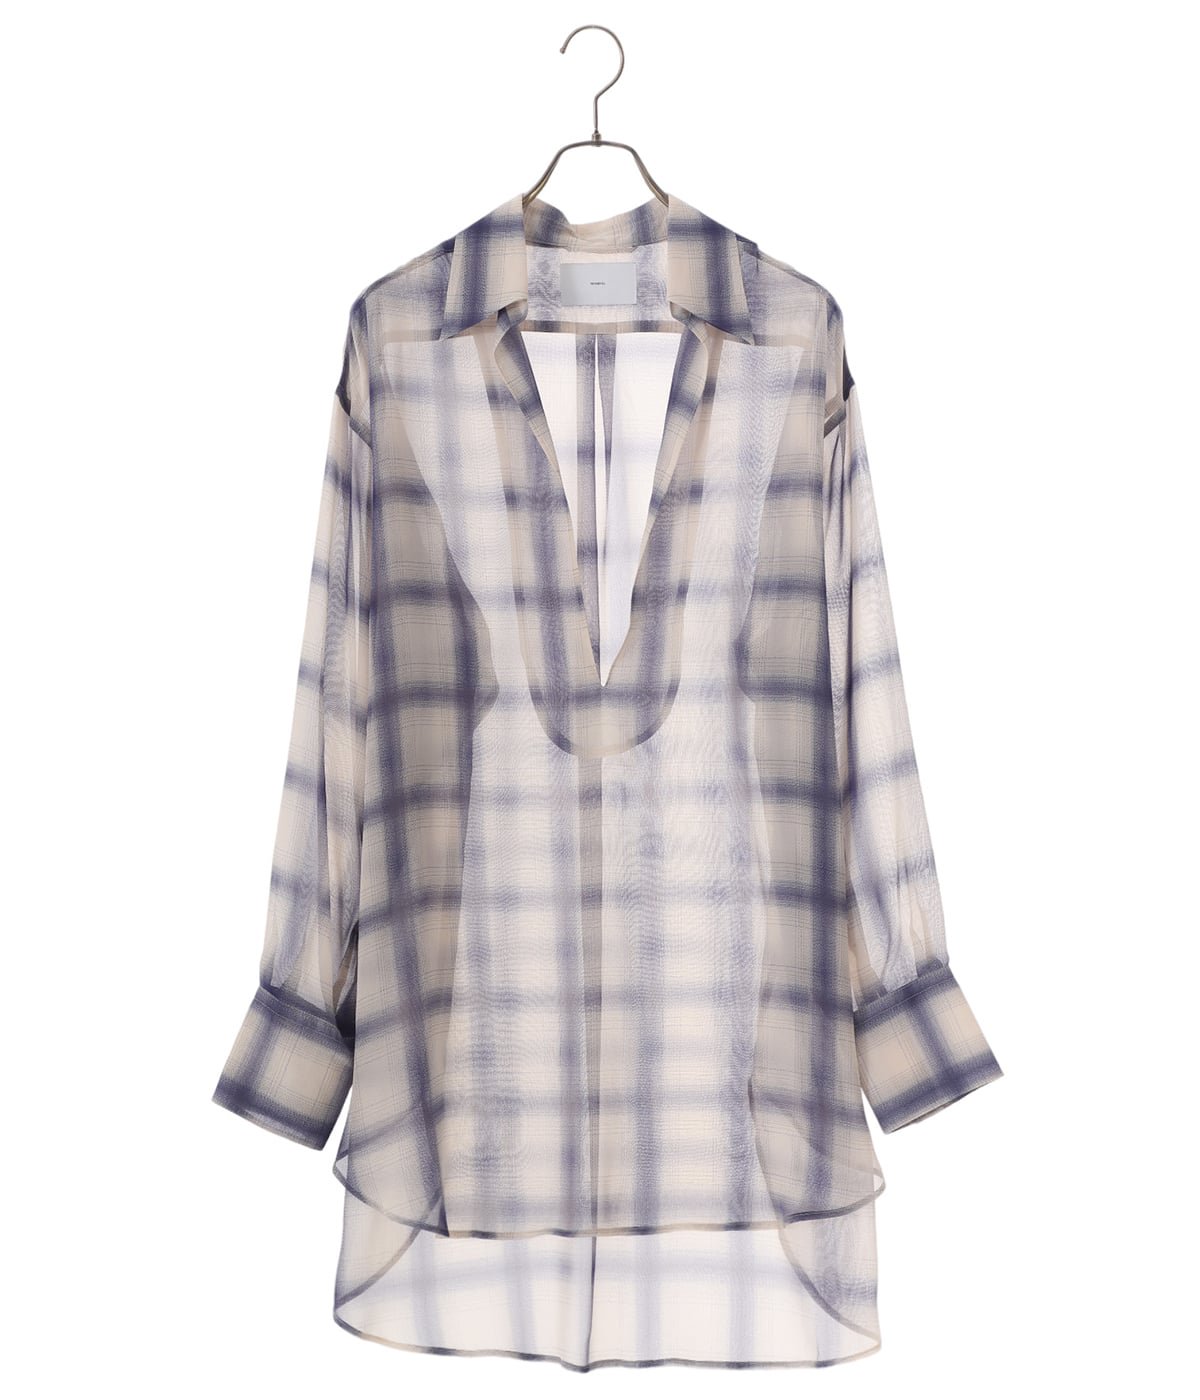 23aw SUGARHILL SHEER OMBRE BLOUSE シュガーヒル